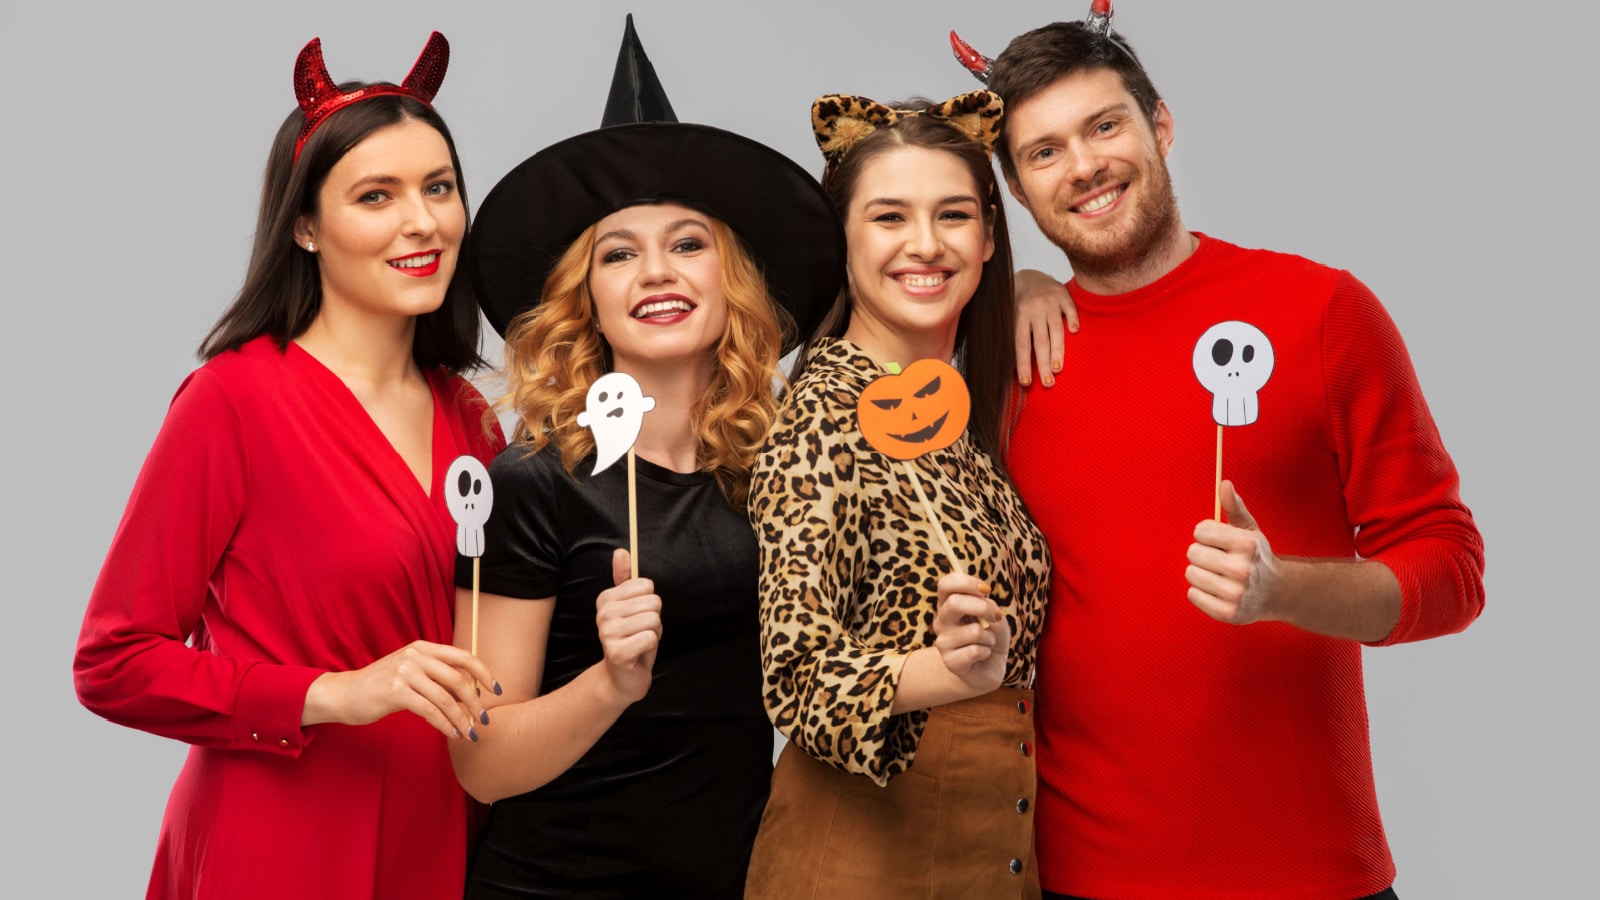 friendship, holiday and photo booth concept - group of happy smiling friends in halloween costumes of devil, witch and cheetah with party props over grey background